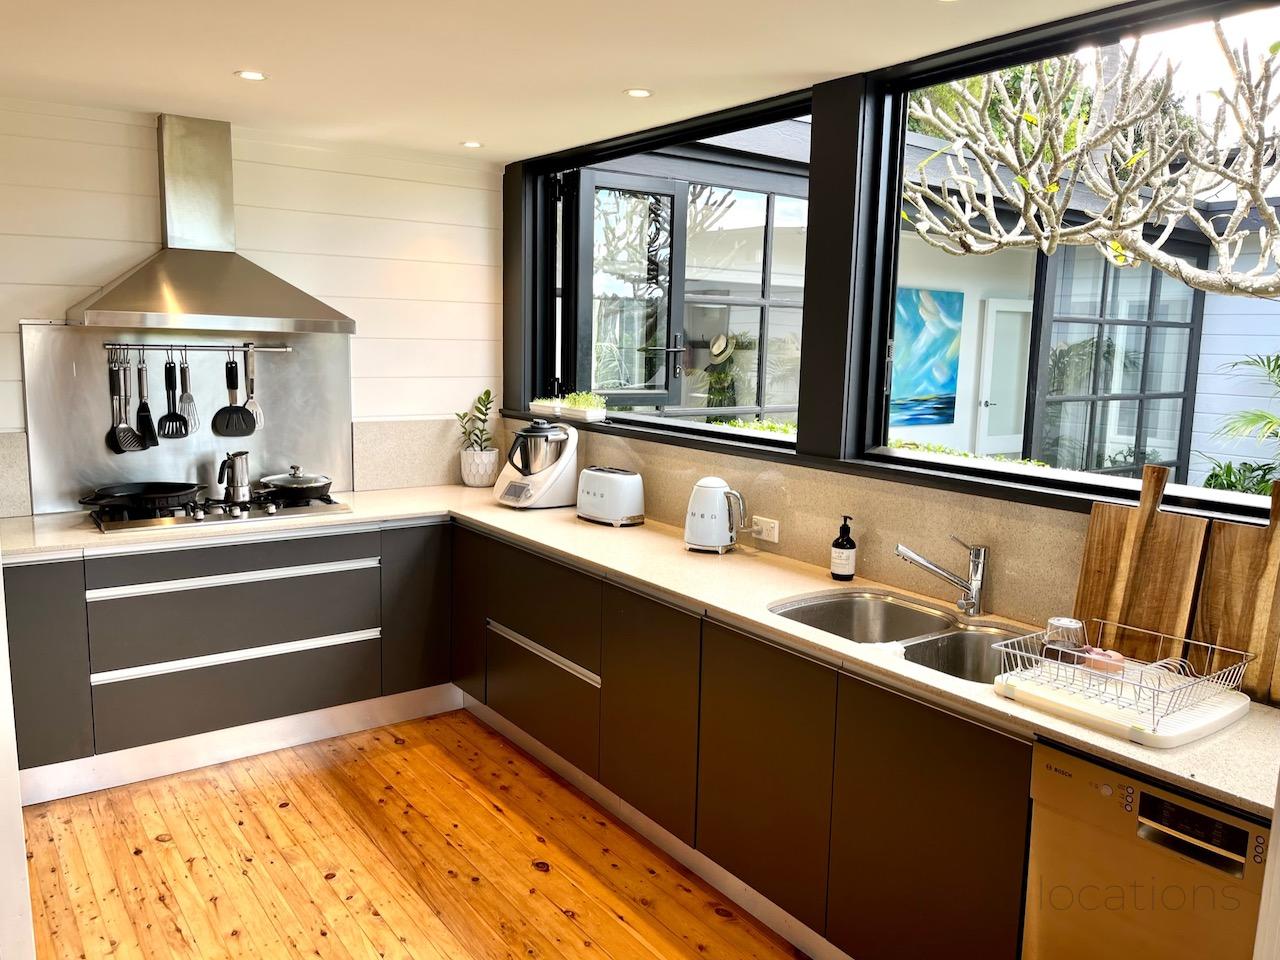 Black kitchen with stainless steel appliances